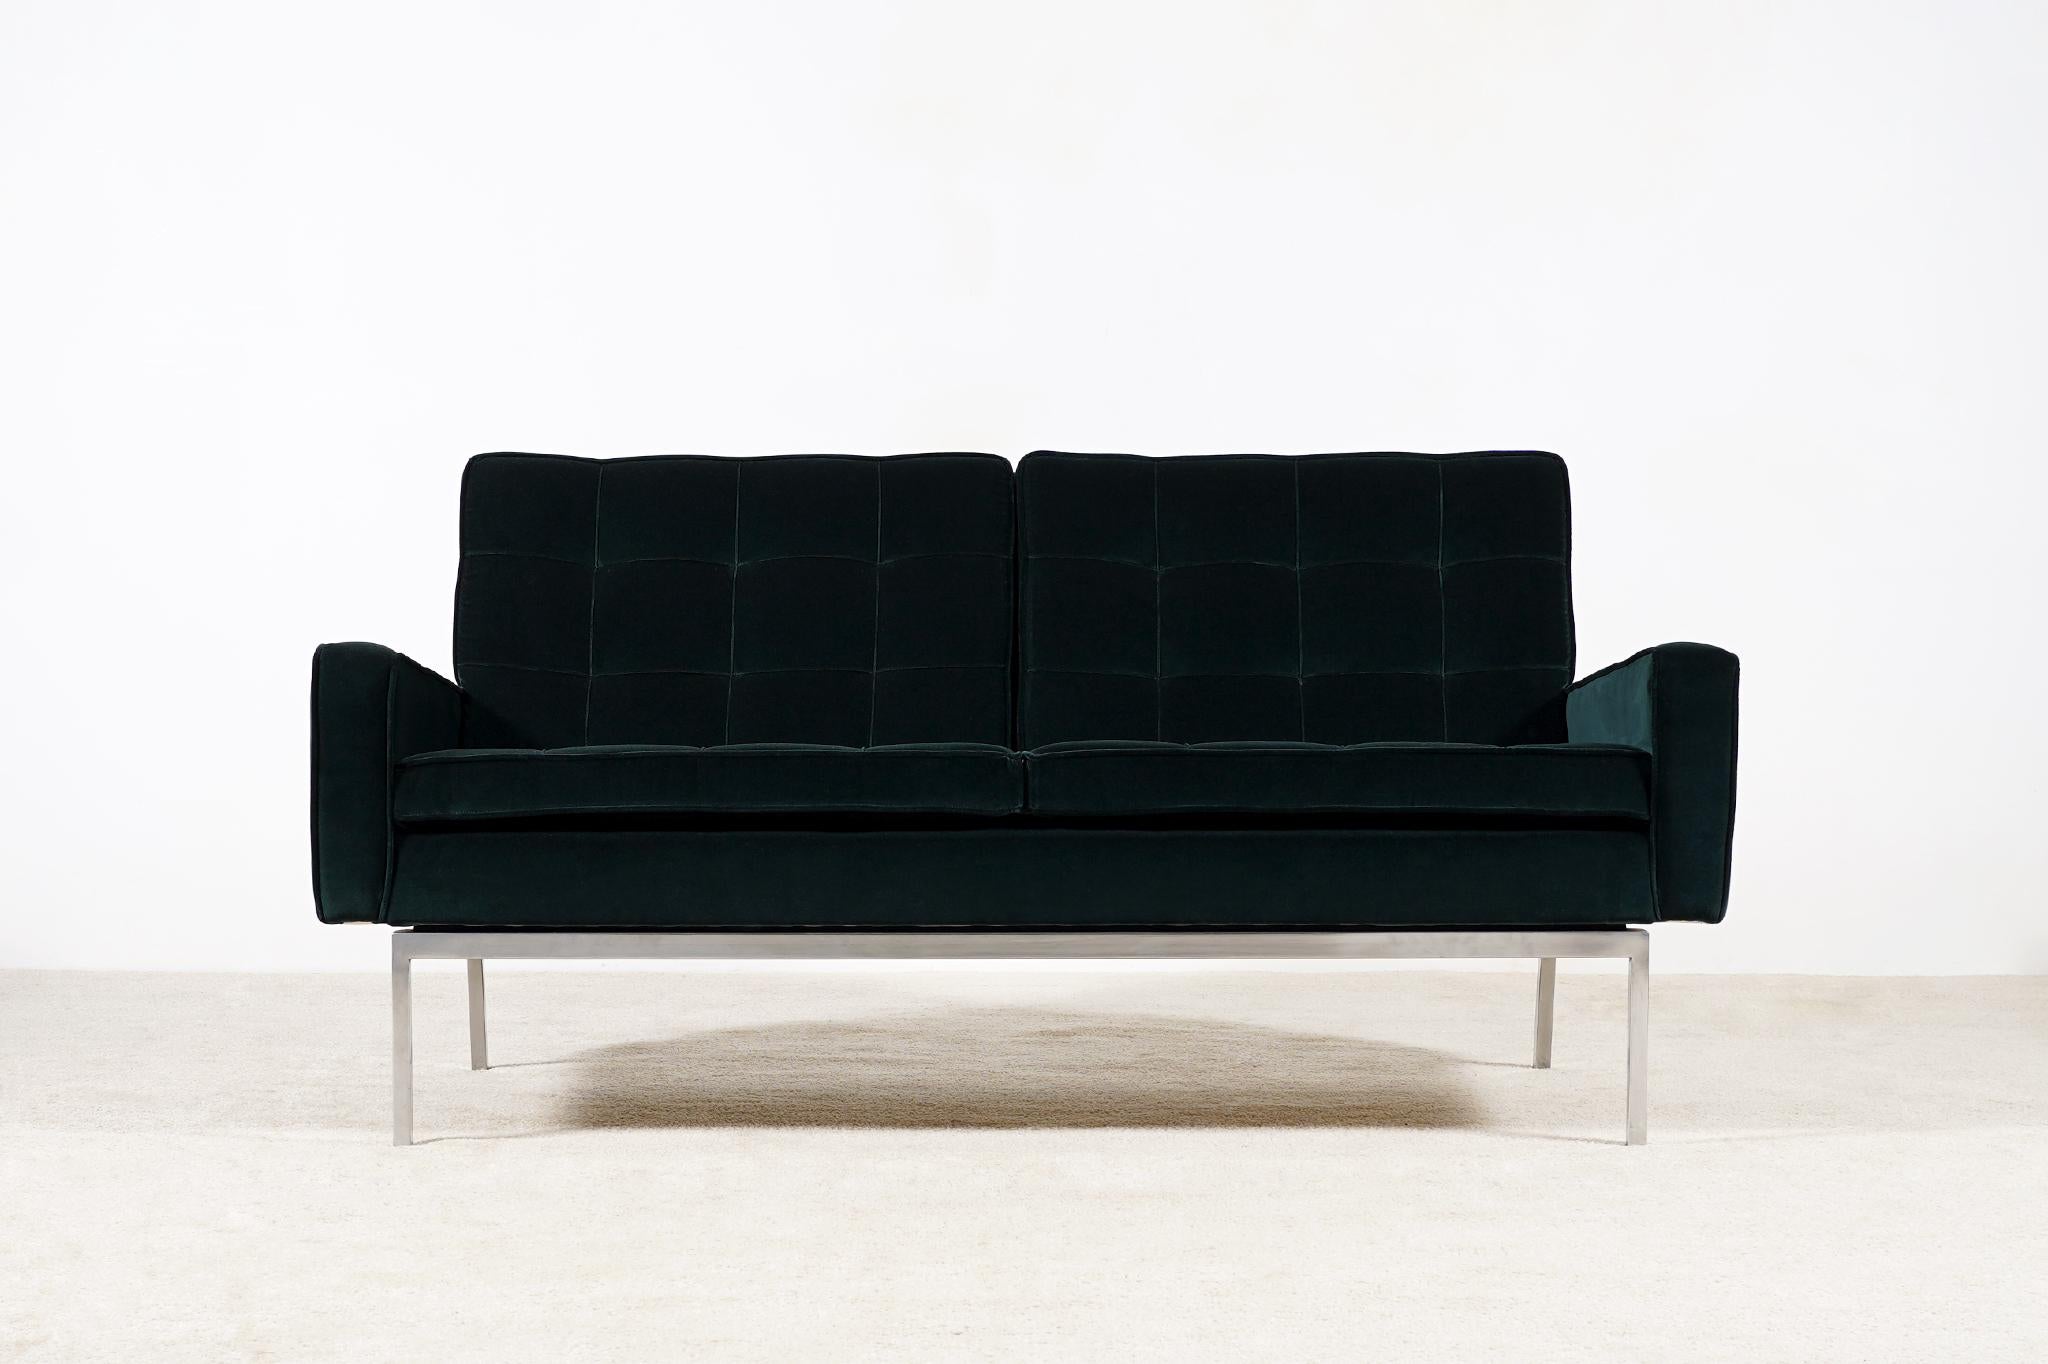 Two seat sofa model 66A designed by Florence Knoll and produced by Knoll International, circa 1960.
This chair was manufactured only from 1958 to 1975.
Newly re-upholstered with a dark green velvet from the Kvadrat Raf Simons collection.
Chromed